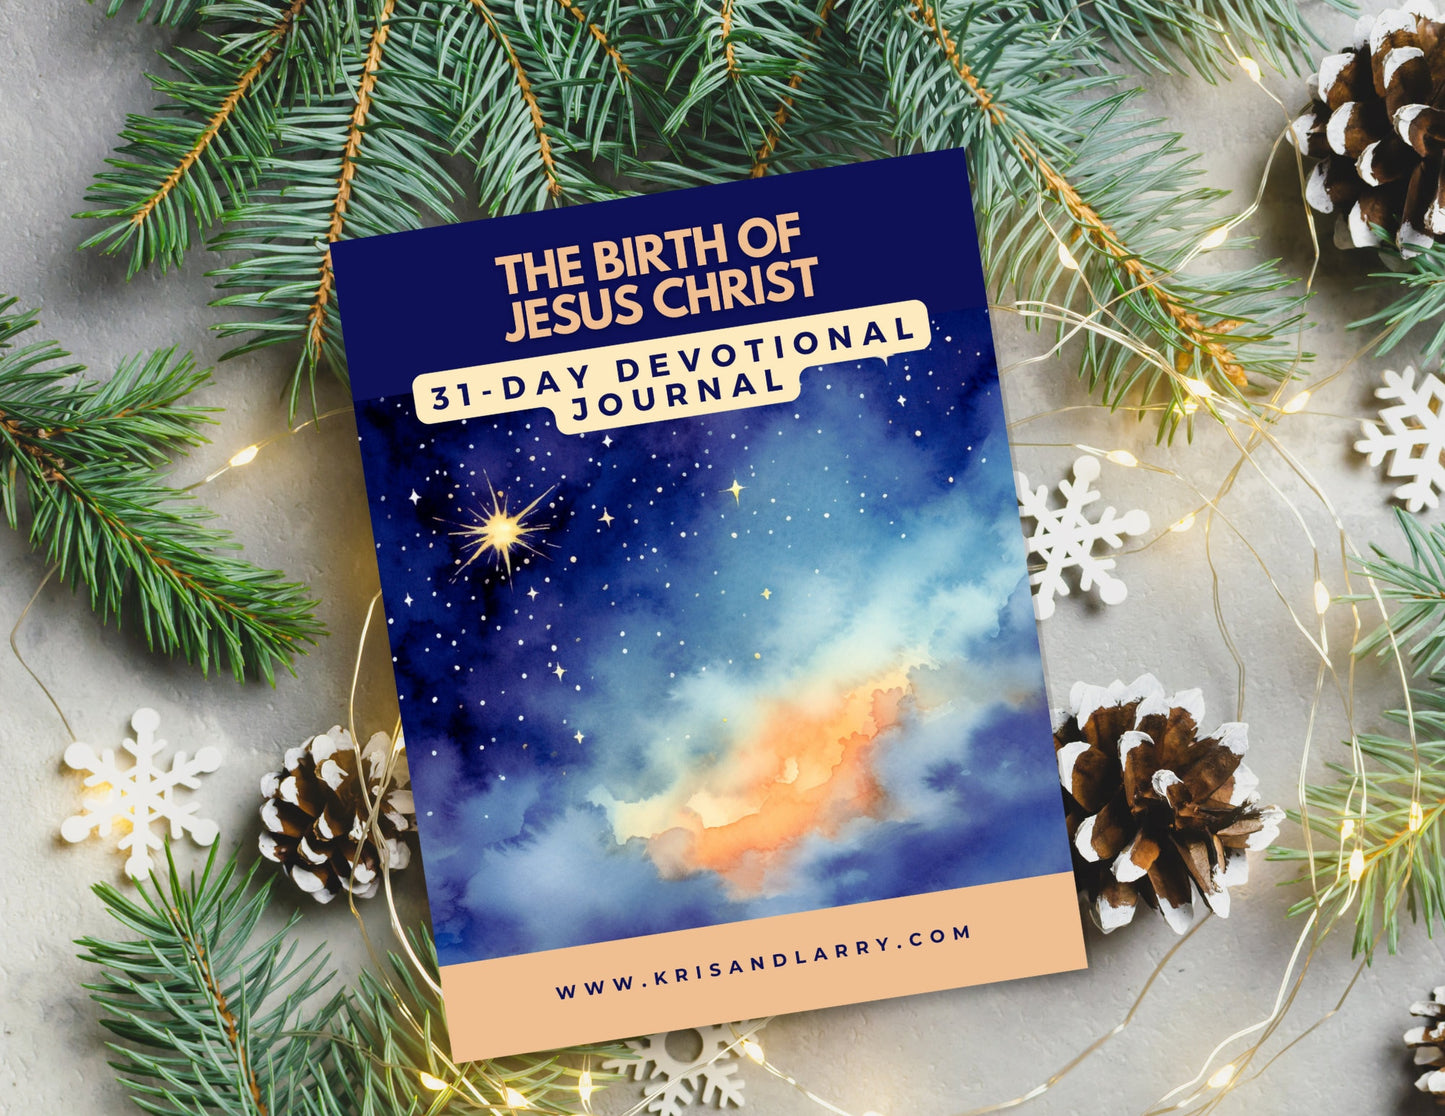 The Birth of Jesus Christ - 31-Day Devotional Journal - Downloadable